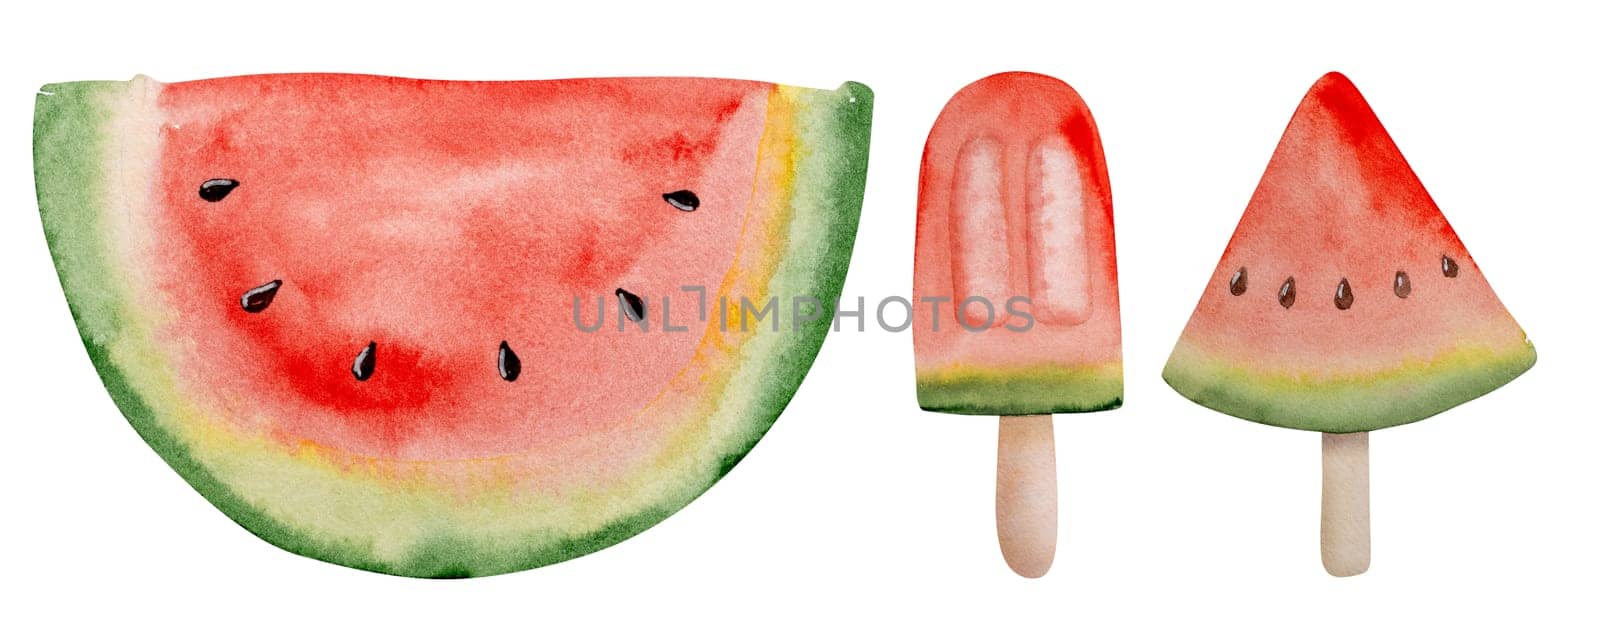 Hand-Painted Watercolor Of Watermelon And Watermelon Ice Cream by tan4ikk1